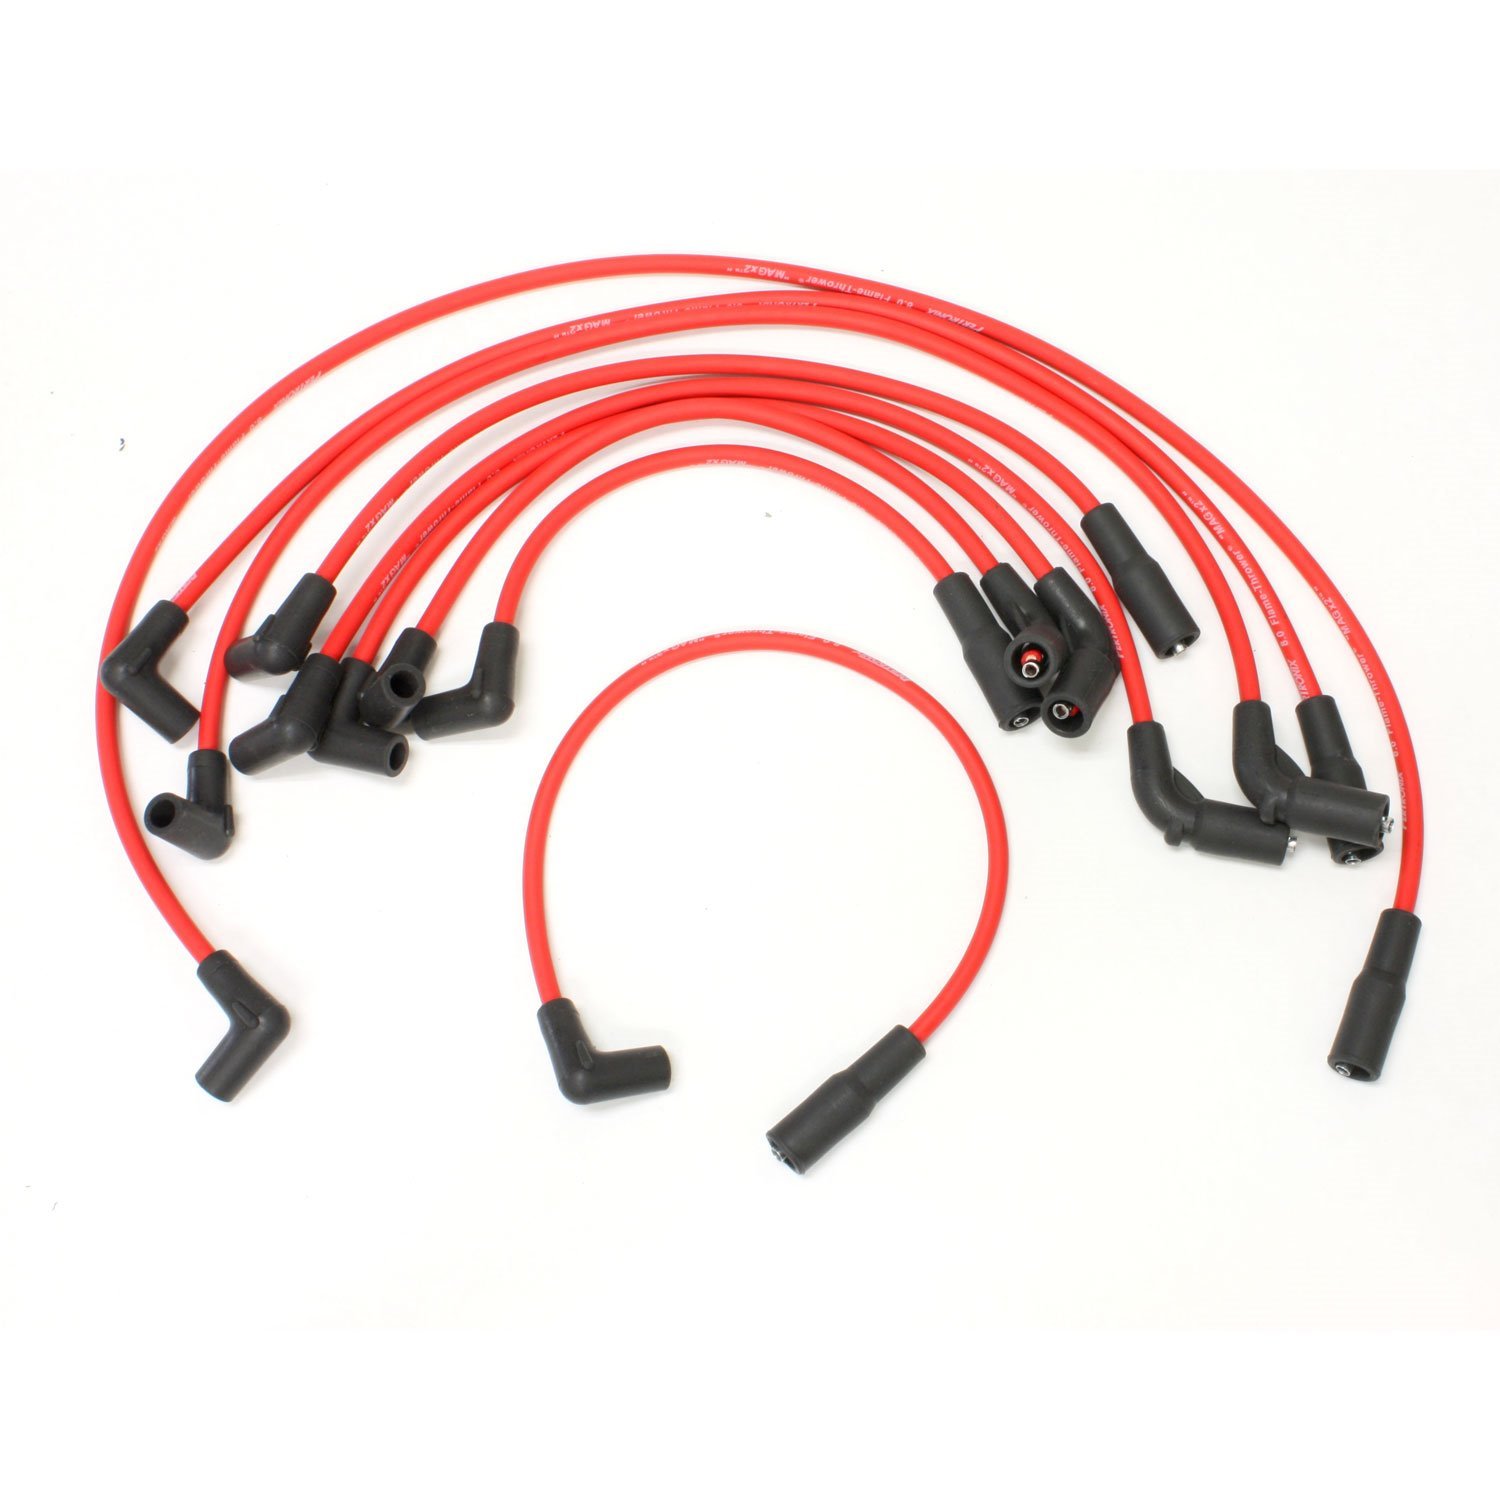 Flame-Thrower 8mm MAGx2 Spark Plug Wires GM Female Socket